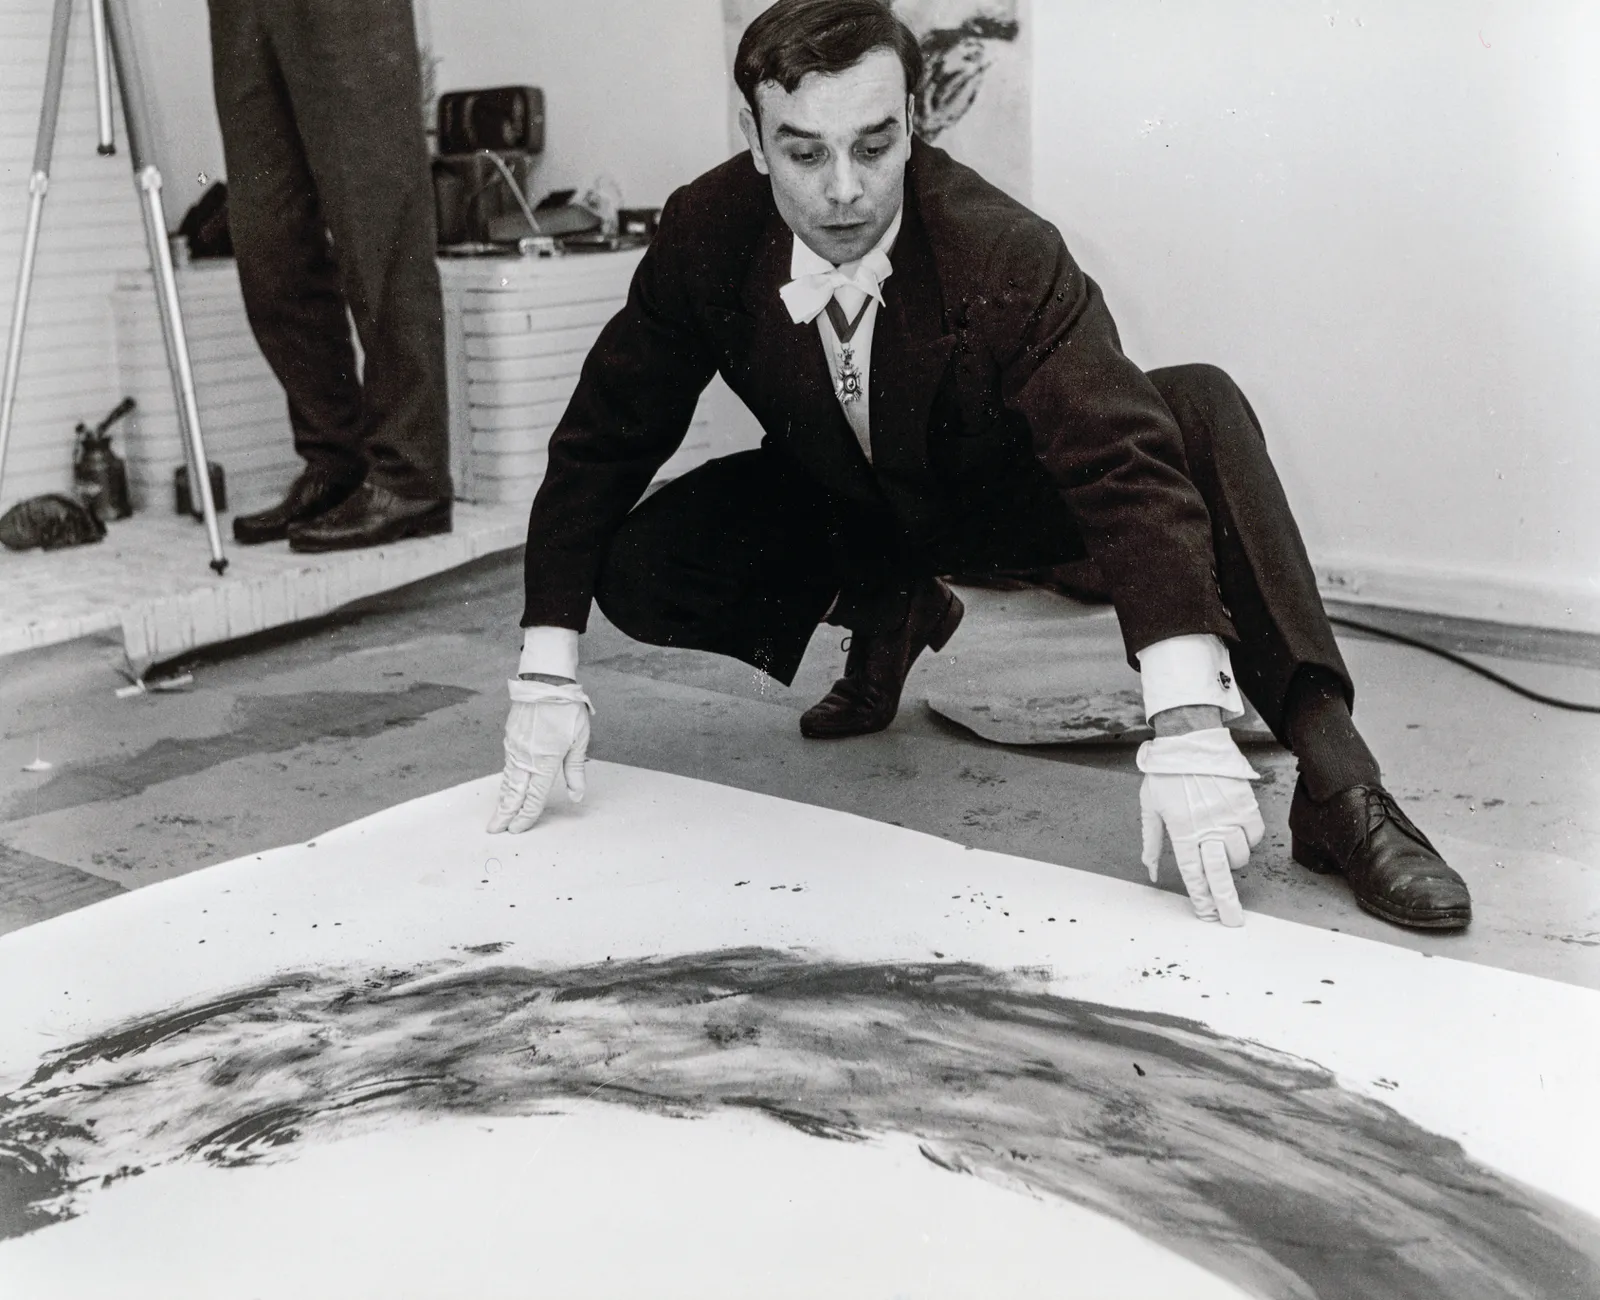 Yves Klein, rok 1960. (Fot. Harry Shunk and Janos Kender. J. Paul Getty Trust. Getty Research Institute, Los Angeles (2014.R.20). © Artwork: Succession Yves Klein, c/o ADAGP, Paris and DACS, London)